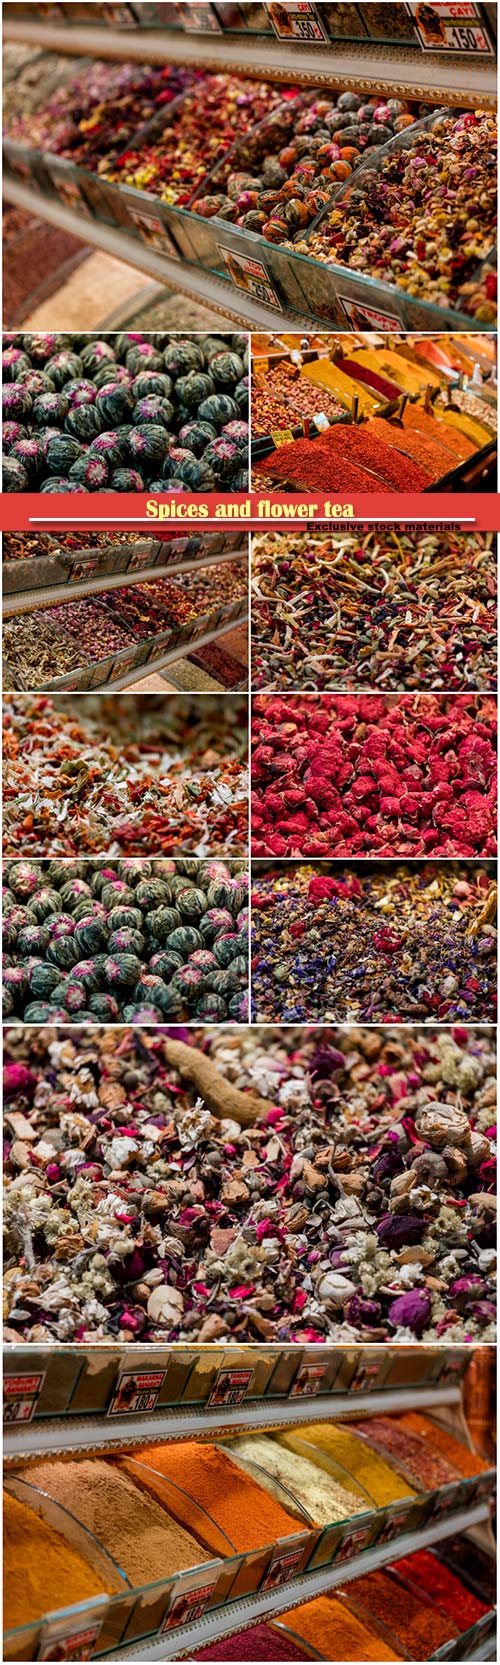 Spices and flower tea in the Turkish Bazaar